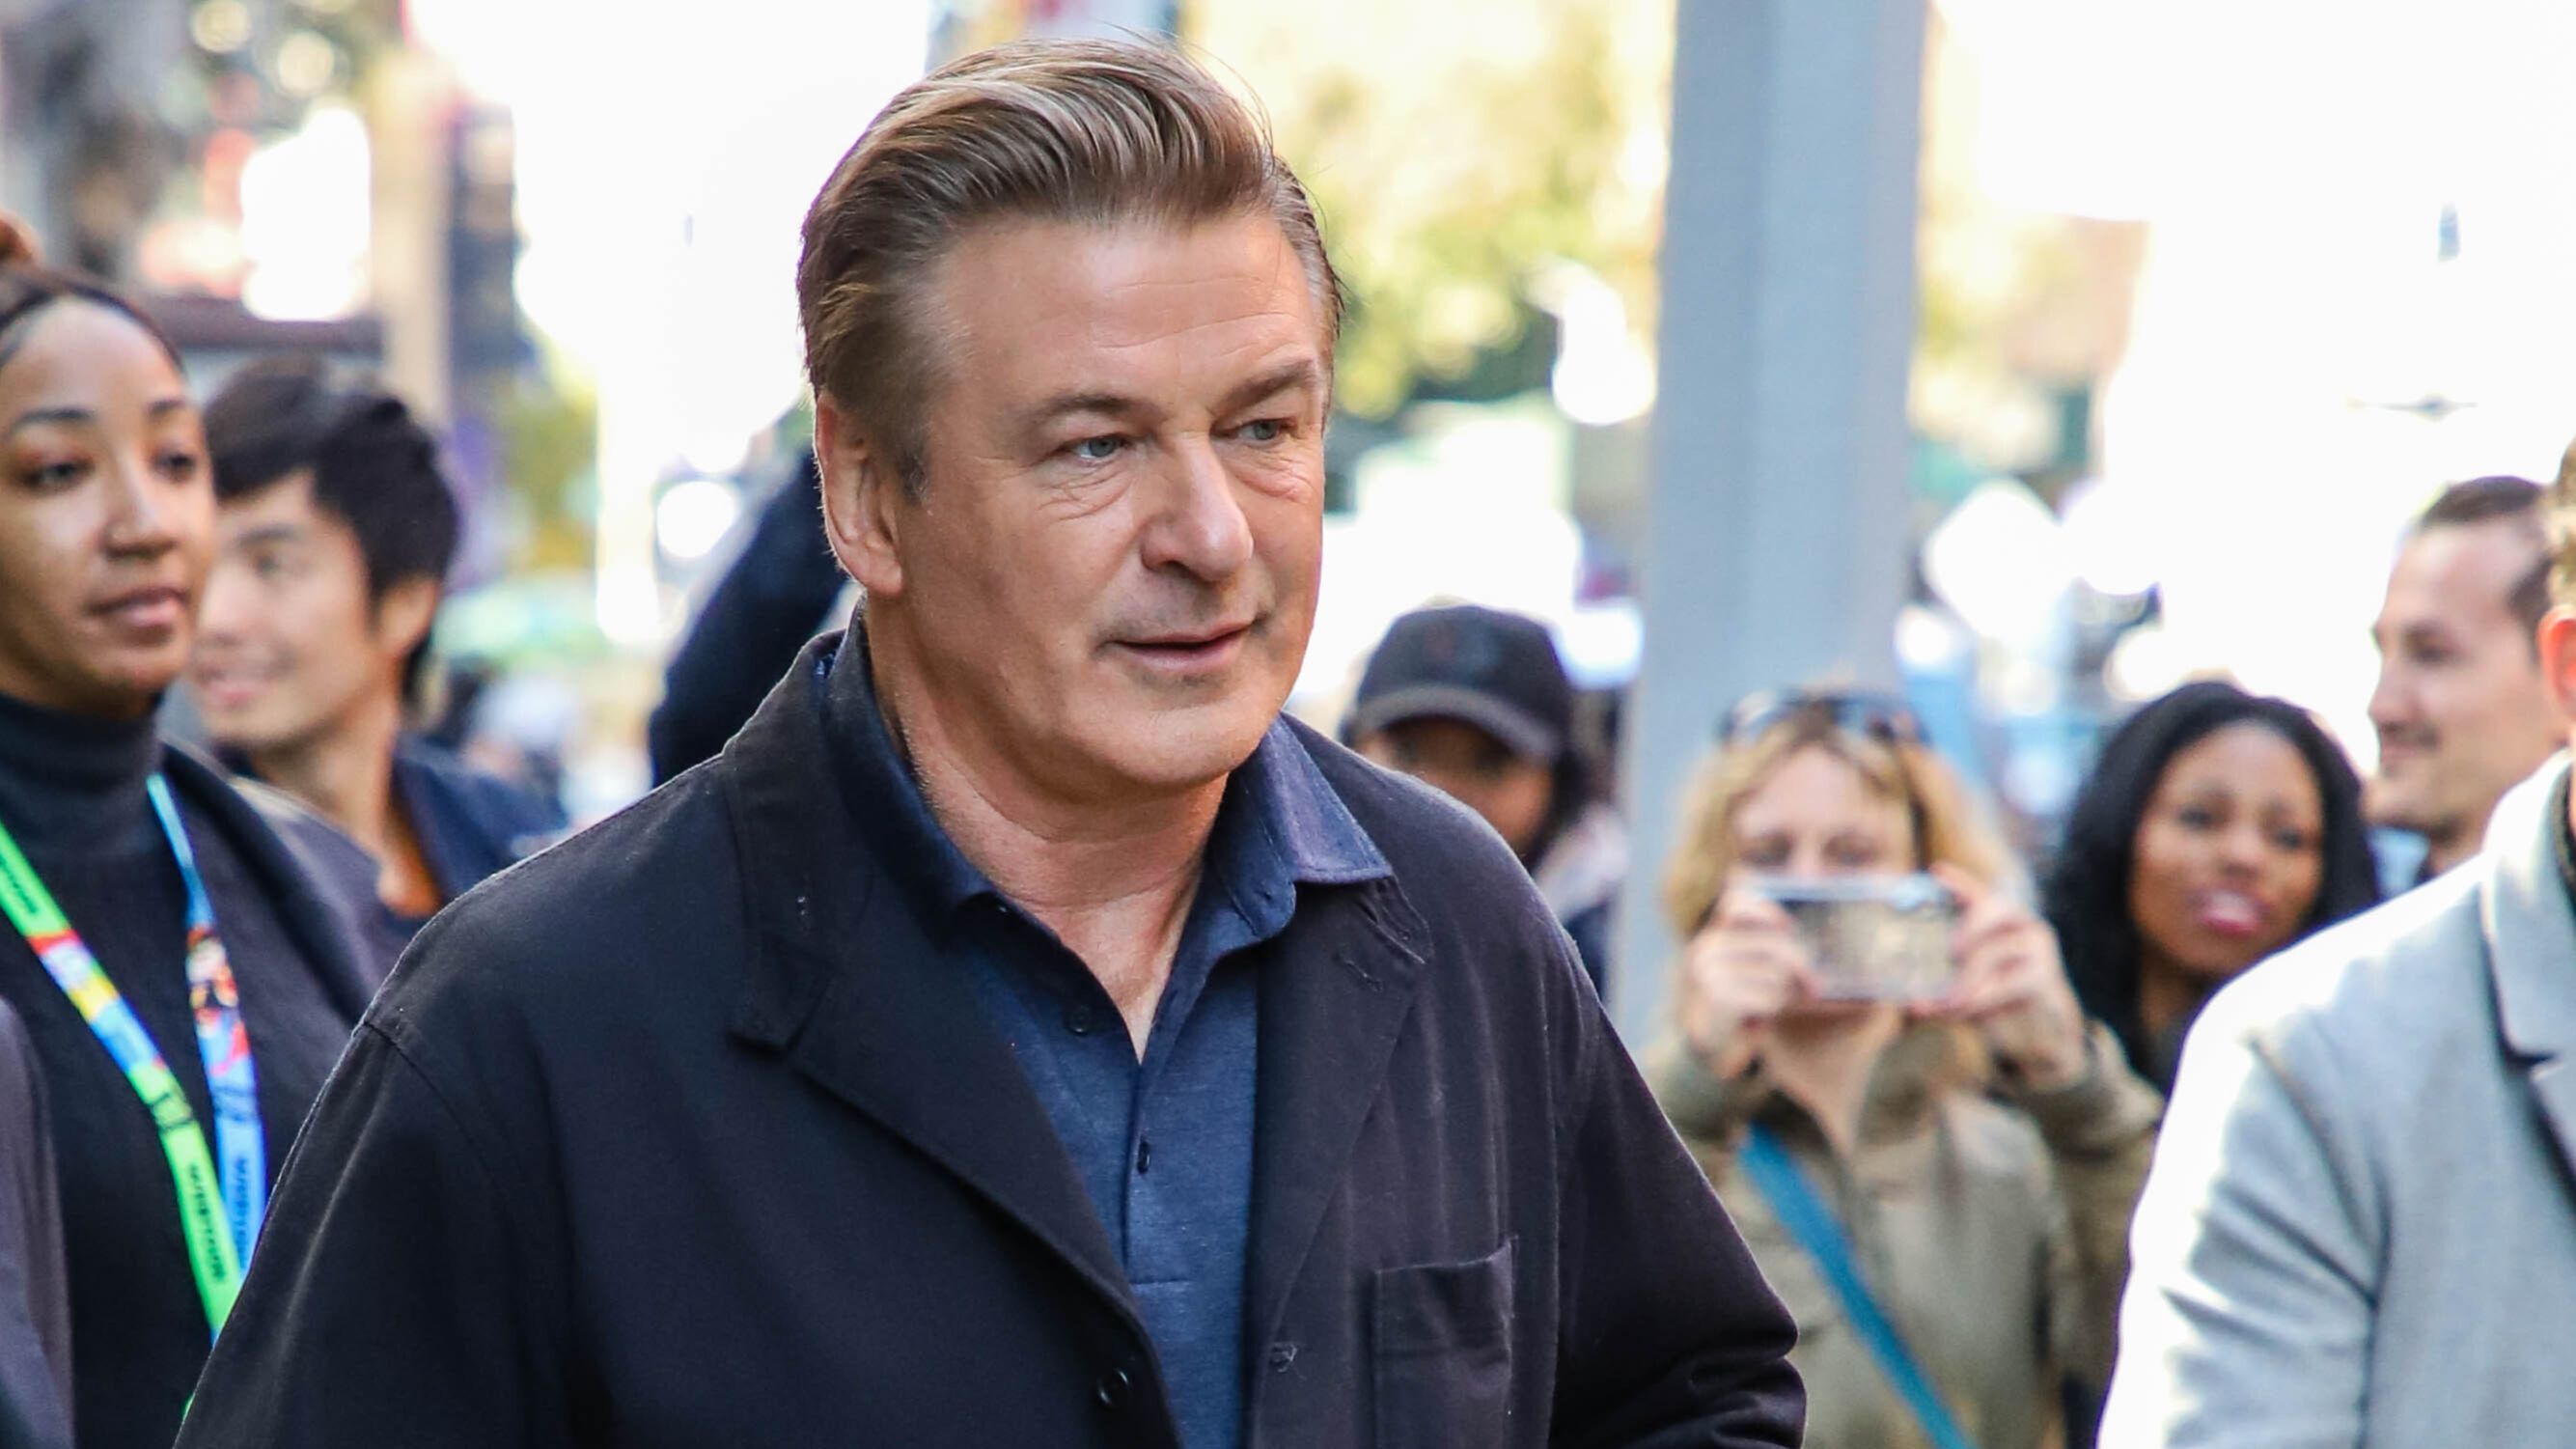 Alec Baldwin reaches an agreement with Hutch’s husband, whom he accidentally killed during the filming of ‘Rust’